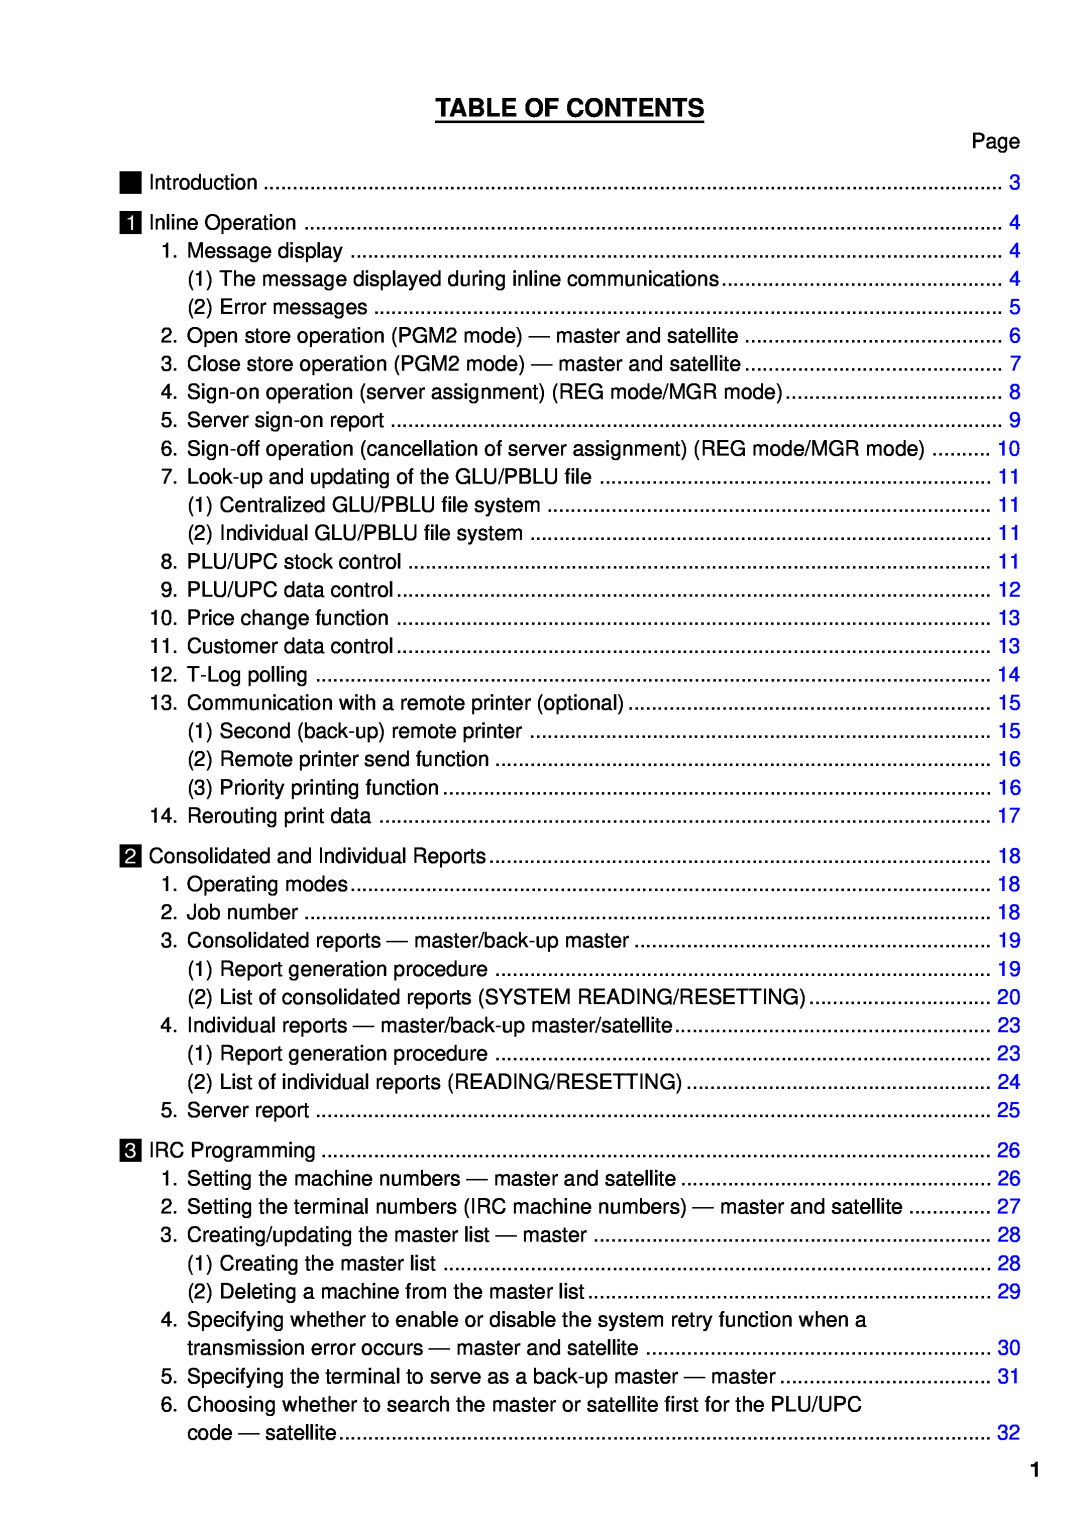 Sharp UP-600, UP-700 instruction manual Table Of Contents 